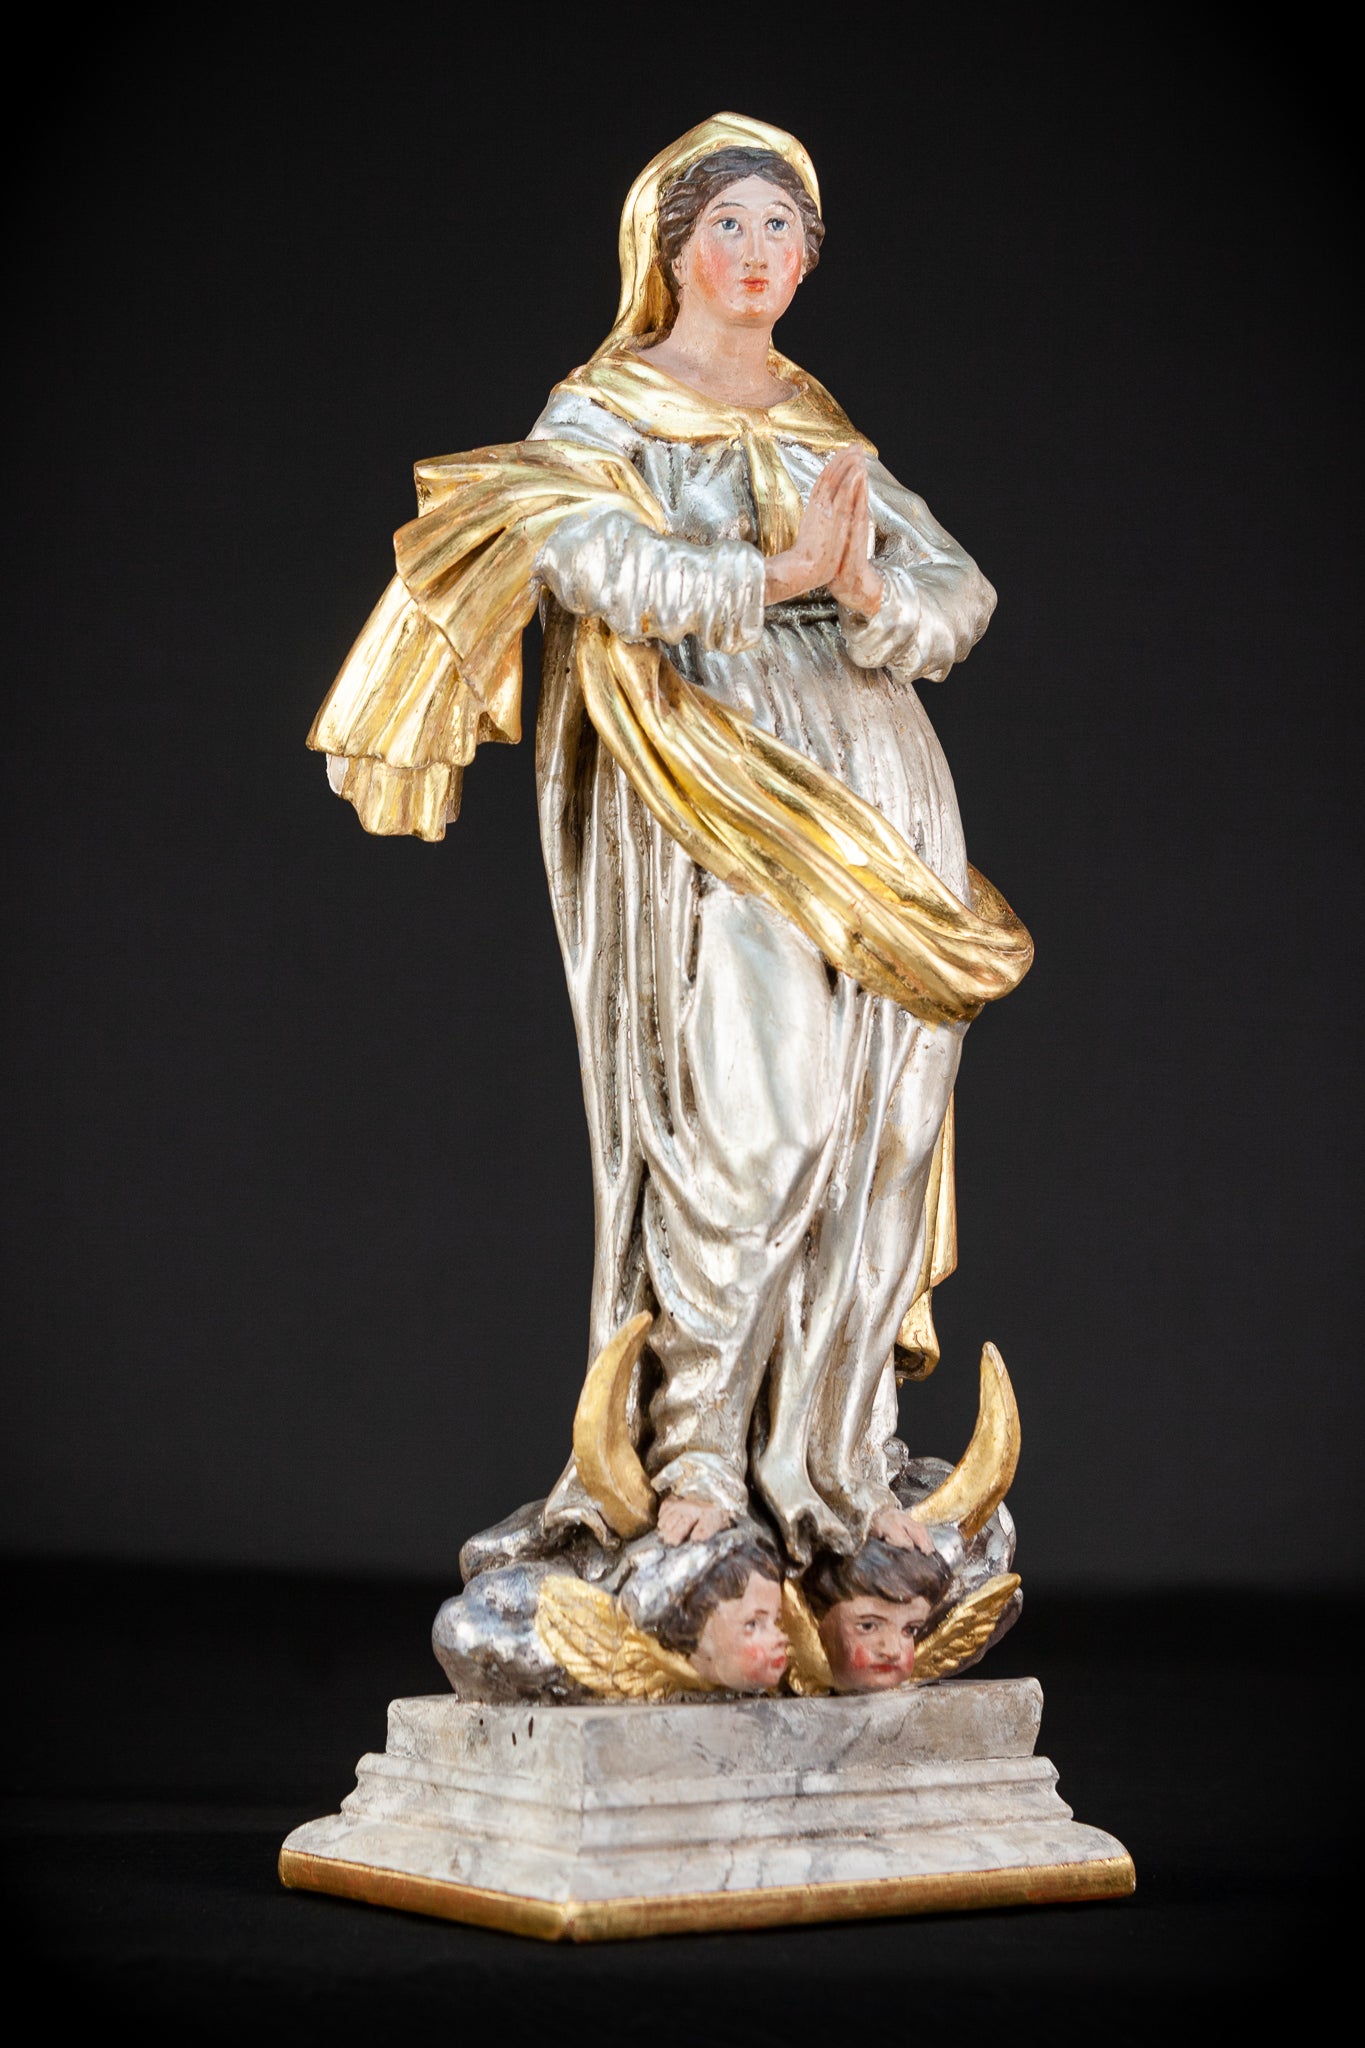 Immaculate Conception of Virgin Mary Wooden Sculpture | 1800s Antique 19.3” / 49 cm